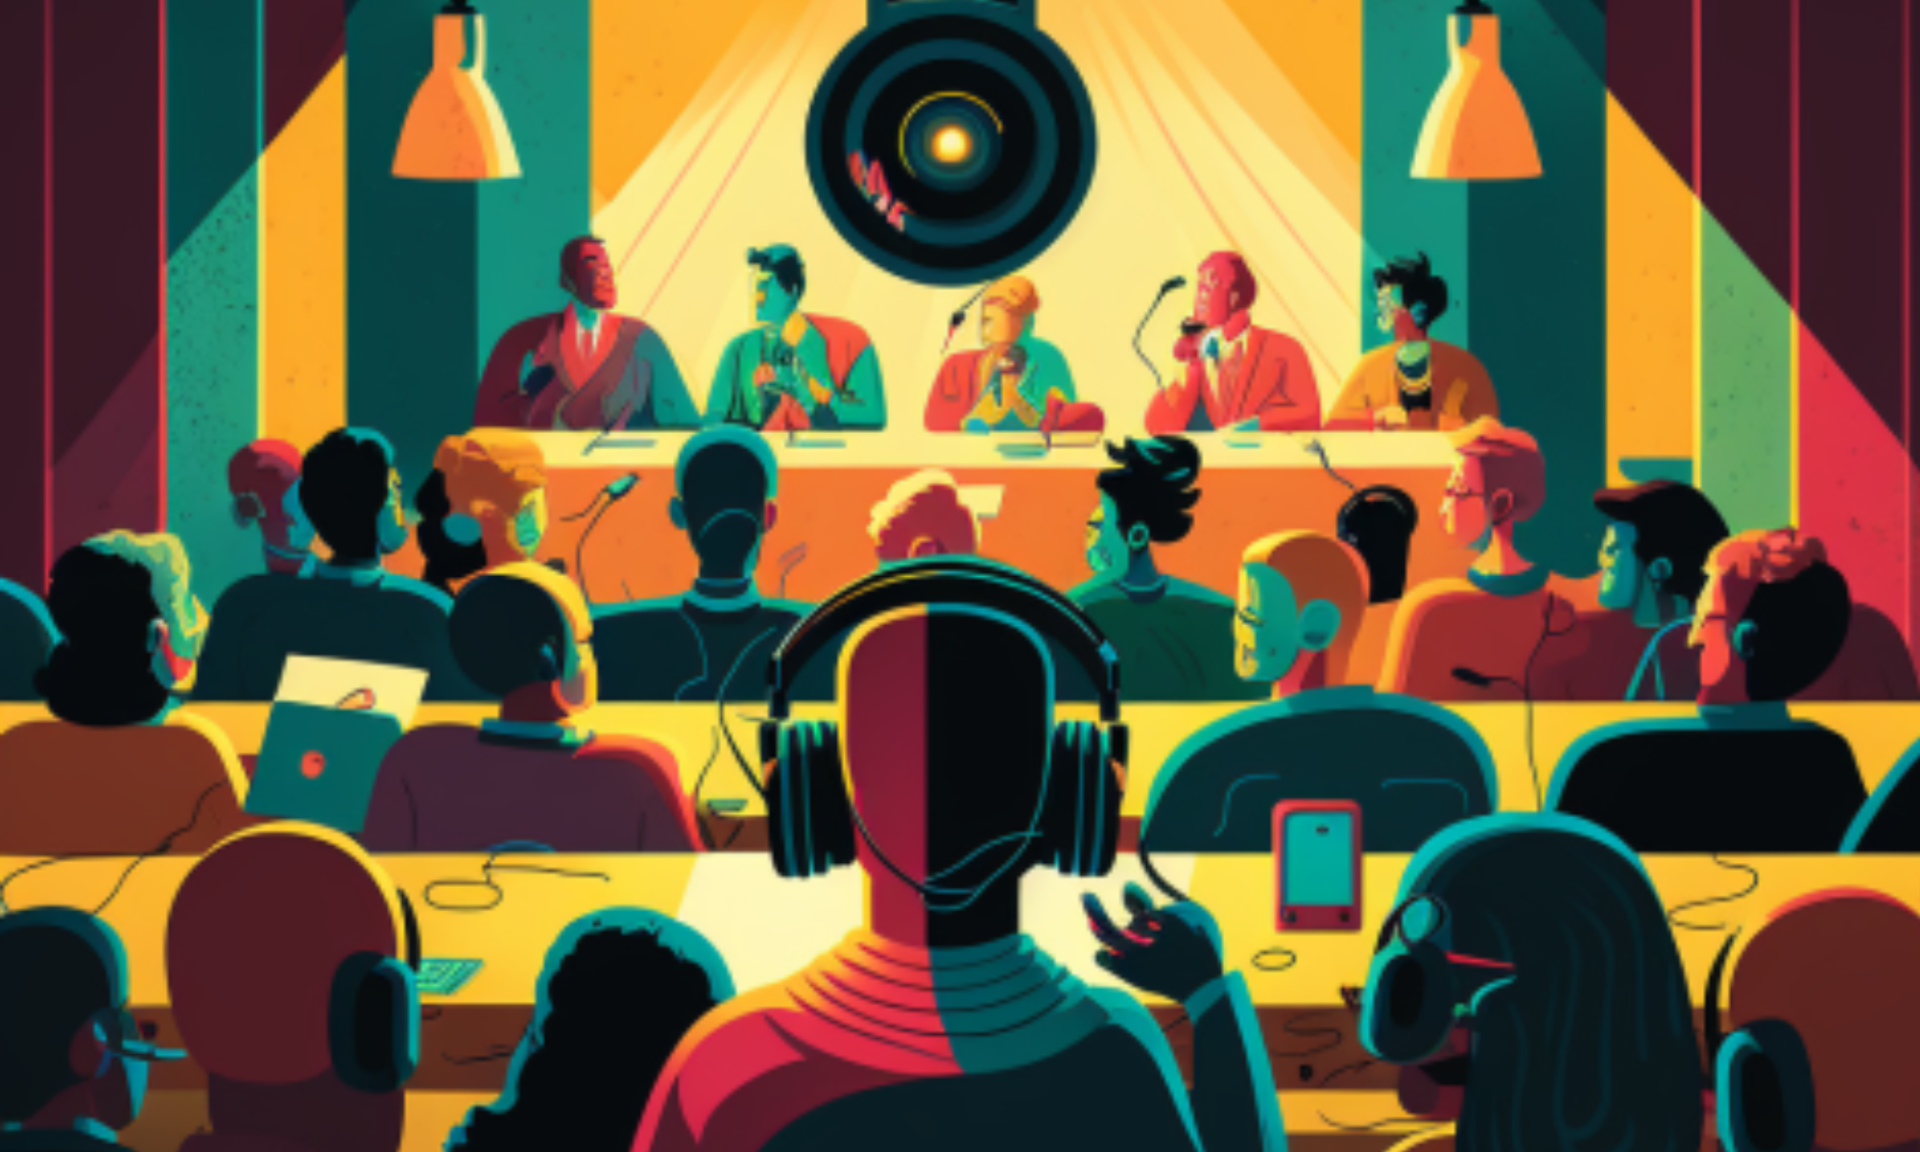 The camera focuses on the speaker, but attention given to the audience. Memorable audio elements in the room. A wide-angle shot of a co-working space room filled with relaxed people all wearing headphones and earphones, all raptly focused on a speaker on the podium at the front in front of a mic. The speaker is illuminated by a spotlight. The colors are bright and dramatic. The mood is one of anticipation and eagerness.